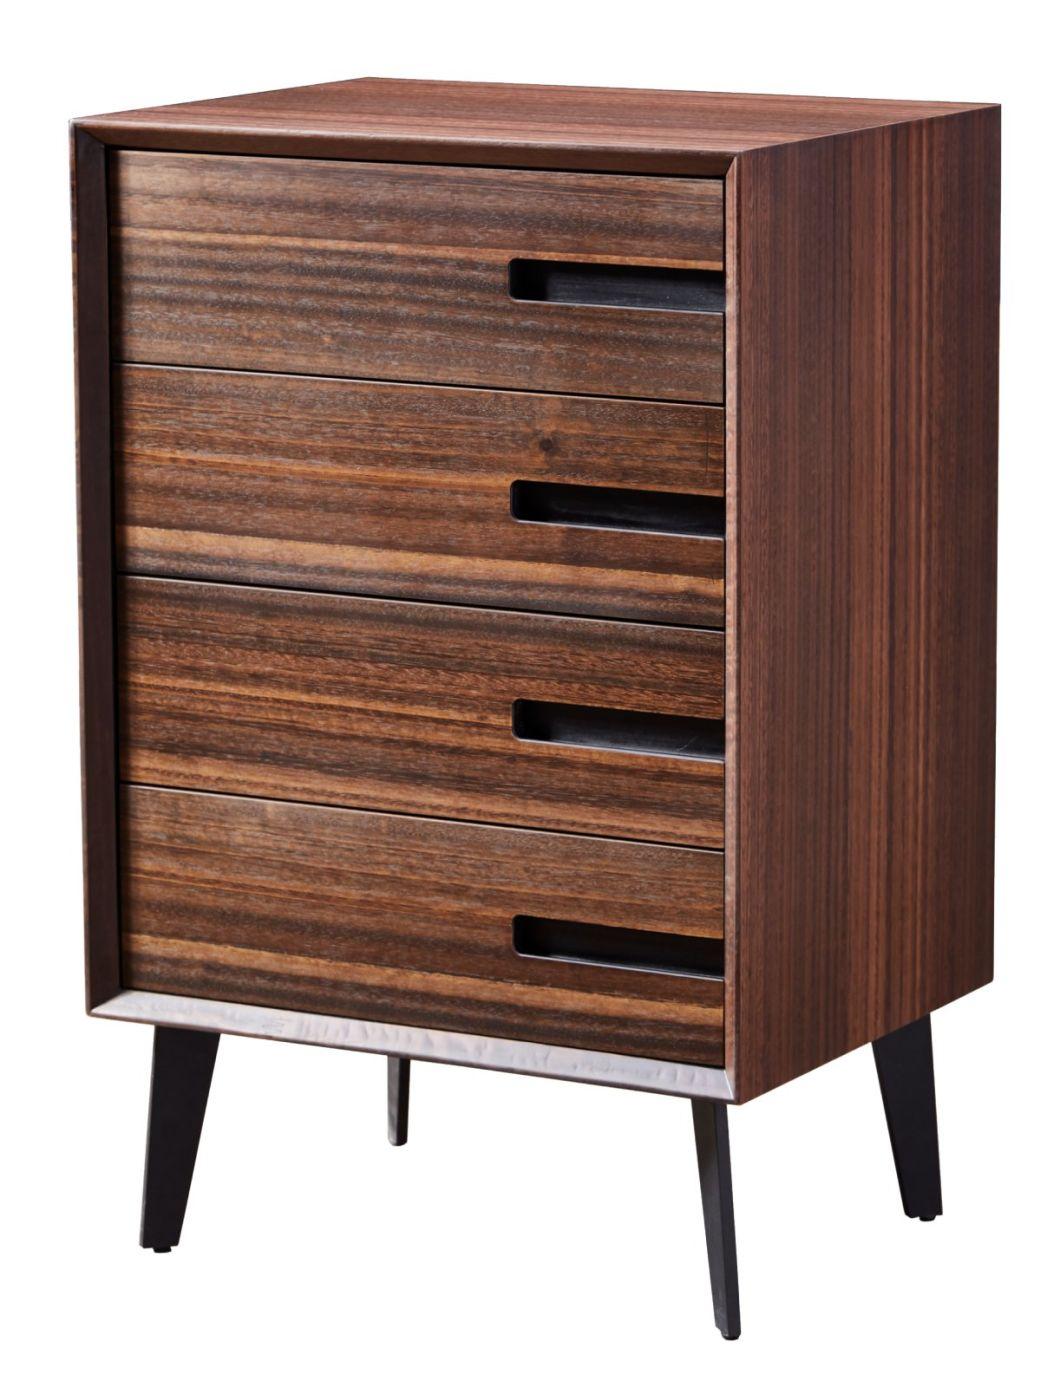 Fu12-4 Wooden Night Cabinet, Latest Design Night Stand in Home and Hotel Furniture Custom-Made